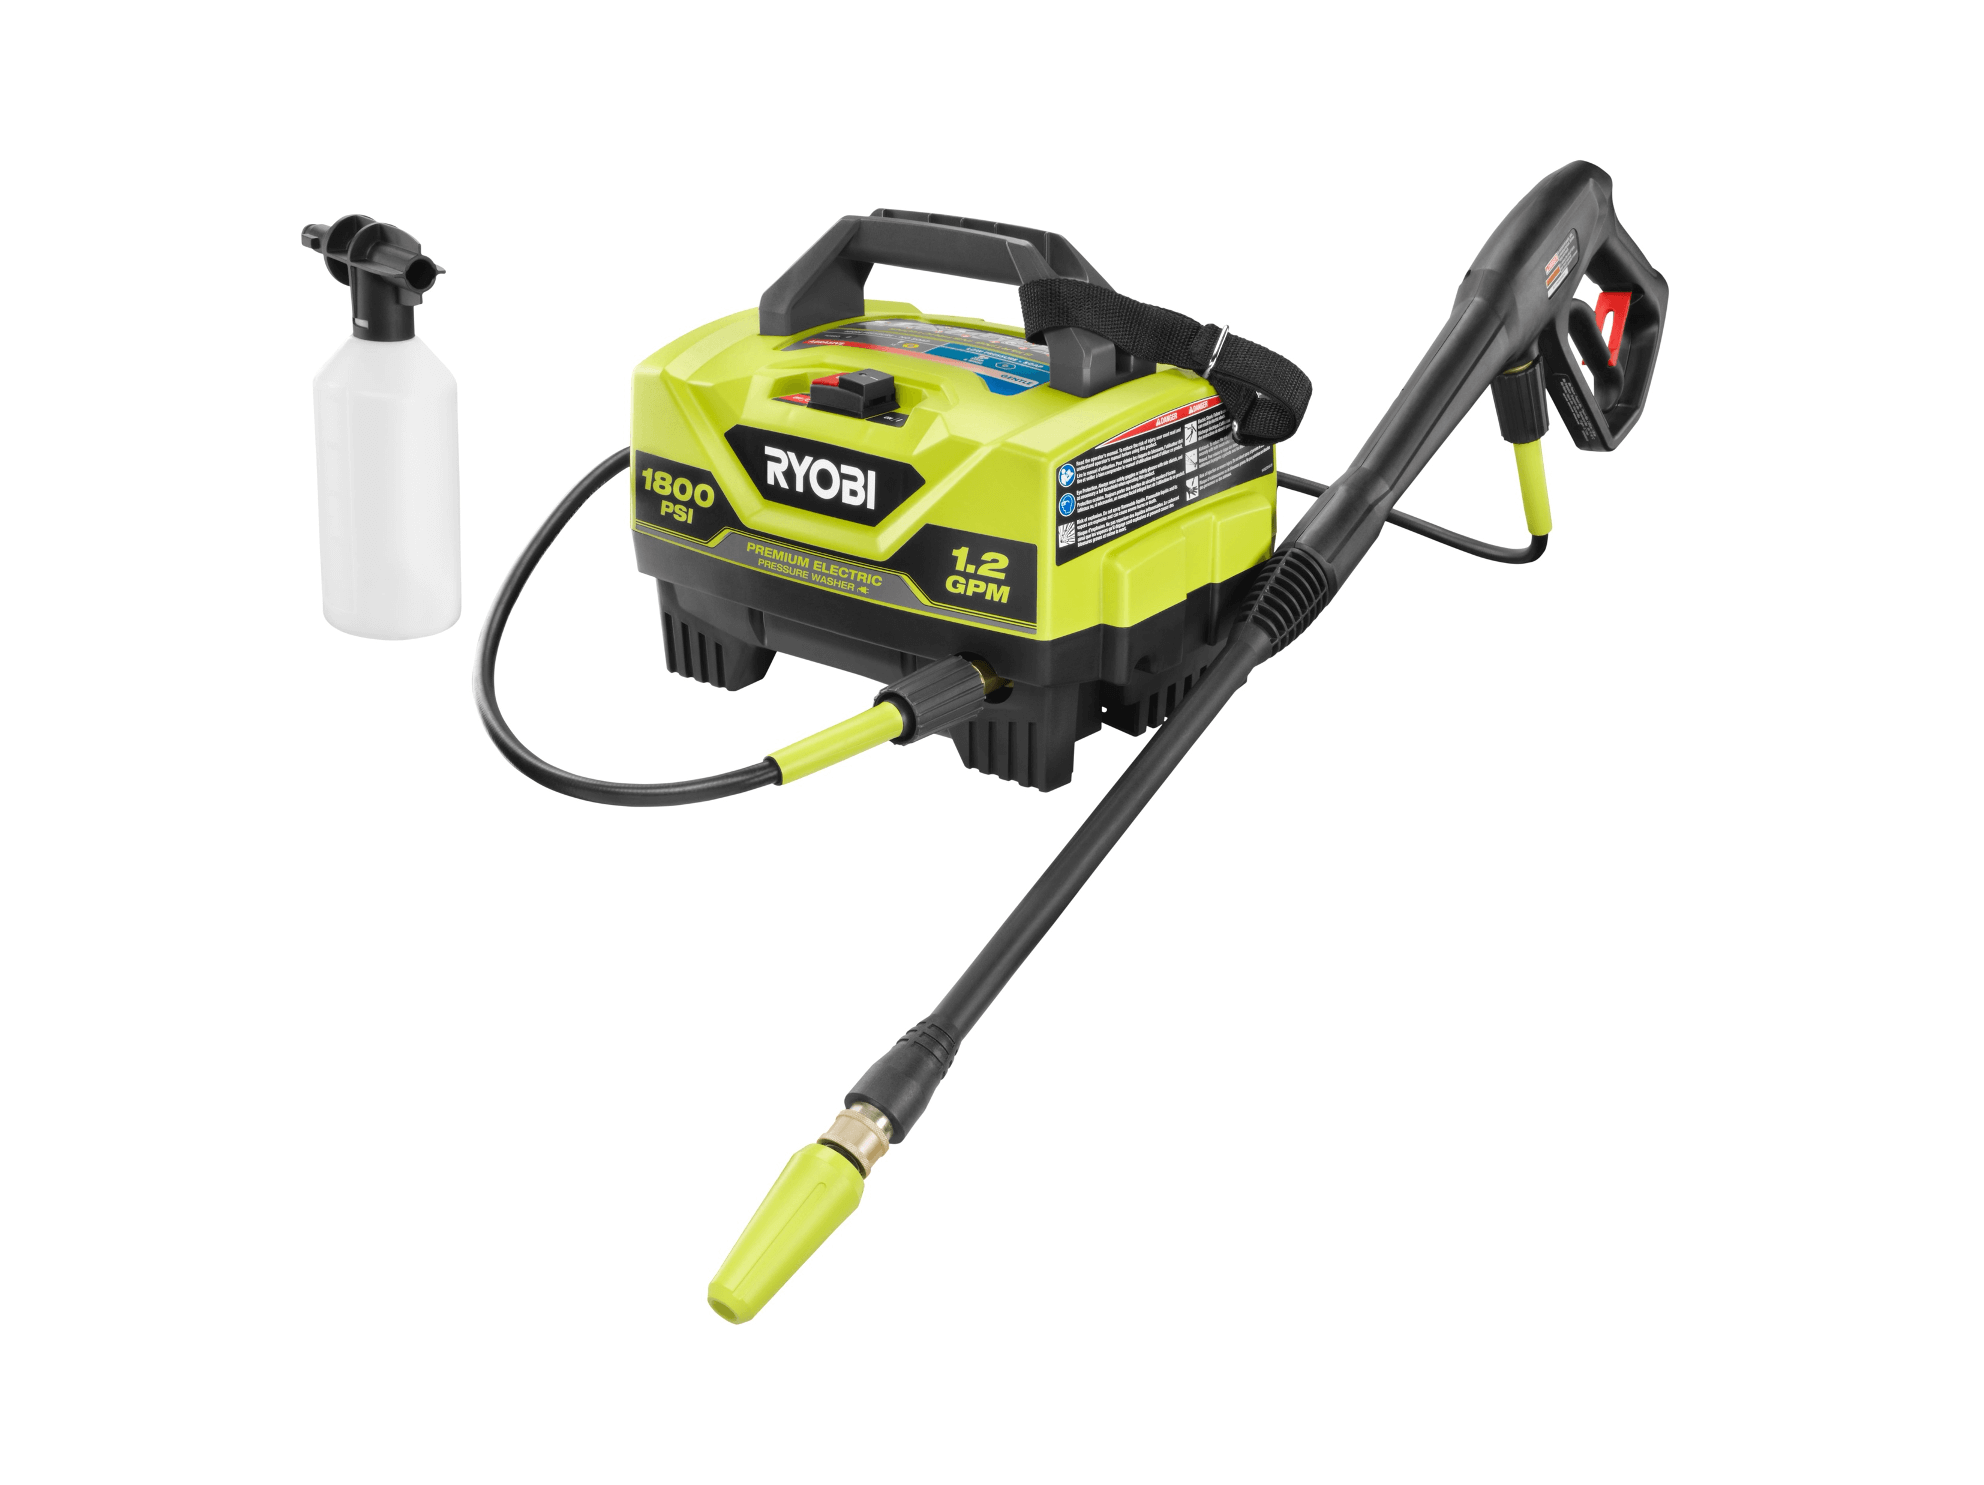 HART 2500PSI 2.5 GPM 212cc Cold Water Gas Pressure Washer